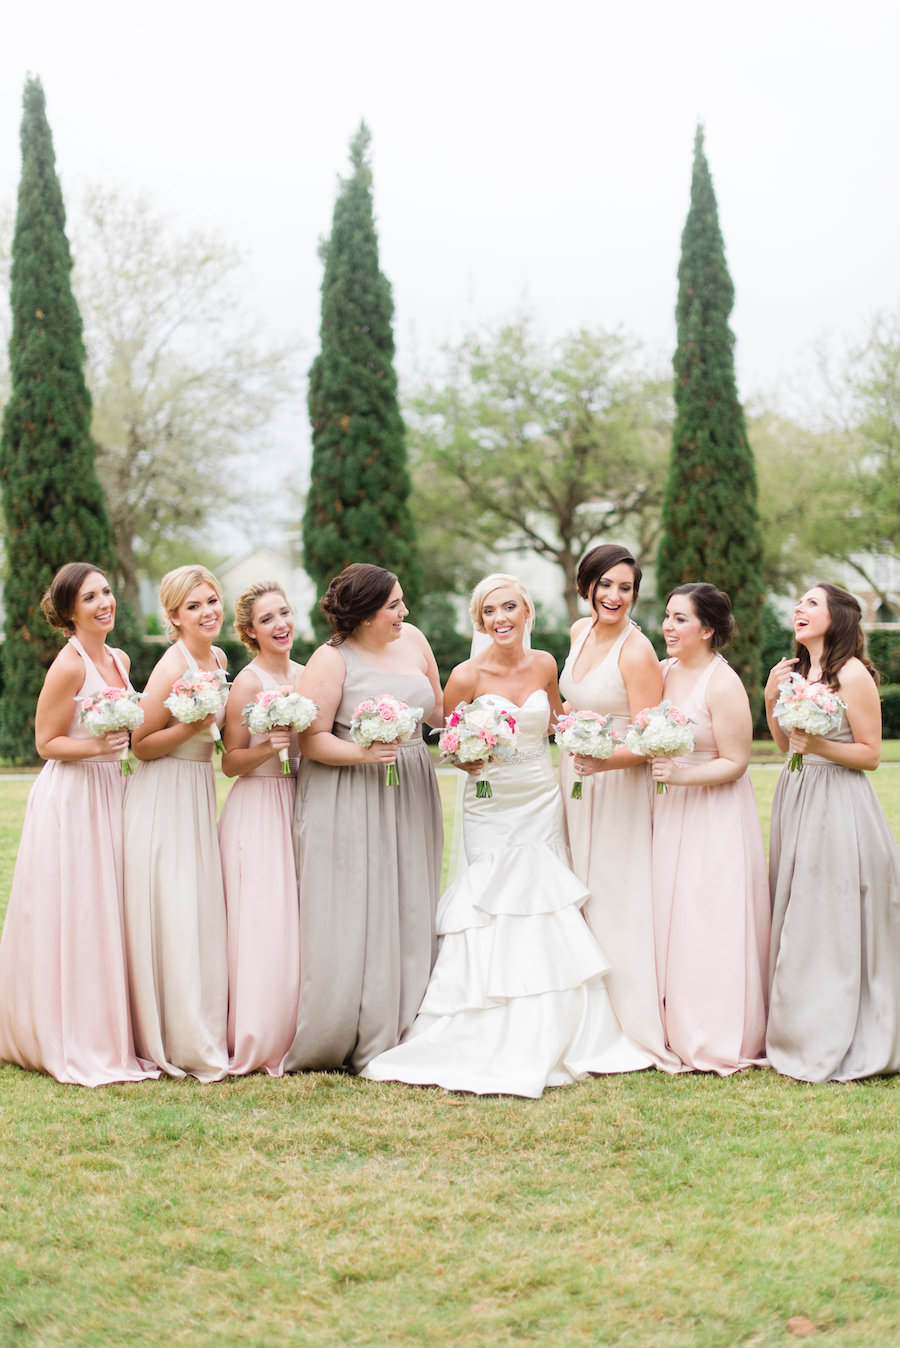 Mismatched Pastel Bridesmaids Dresses | Blush Pink, White and Hot Pink Fuchsia Wedding Bouquet with Succulents